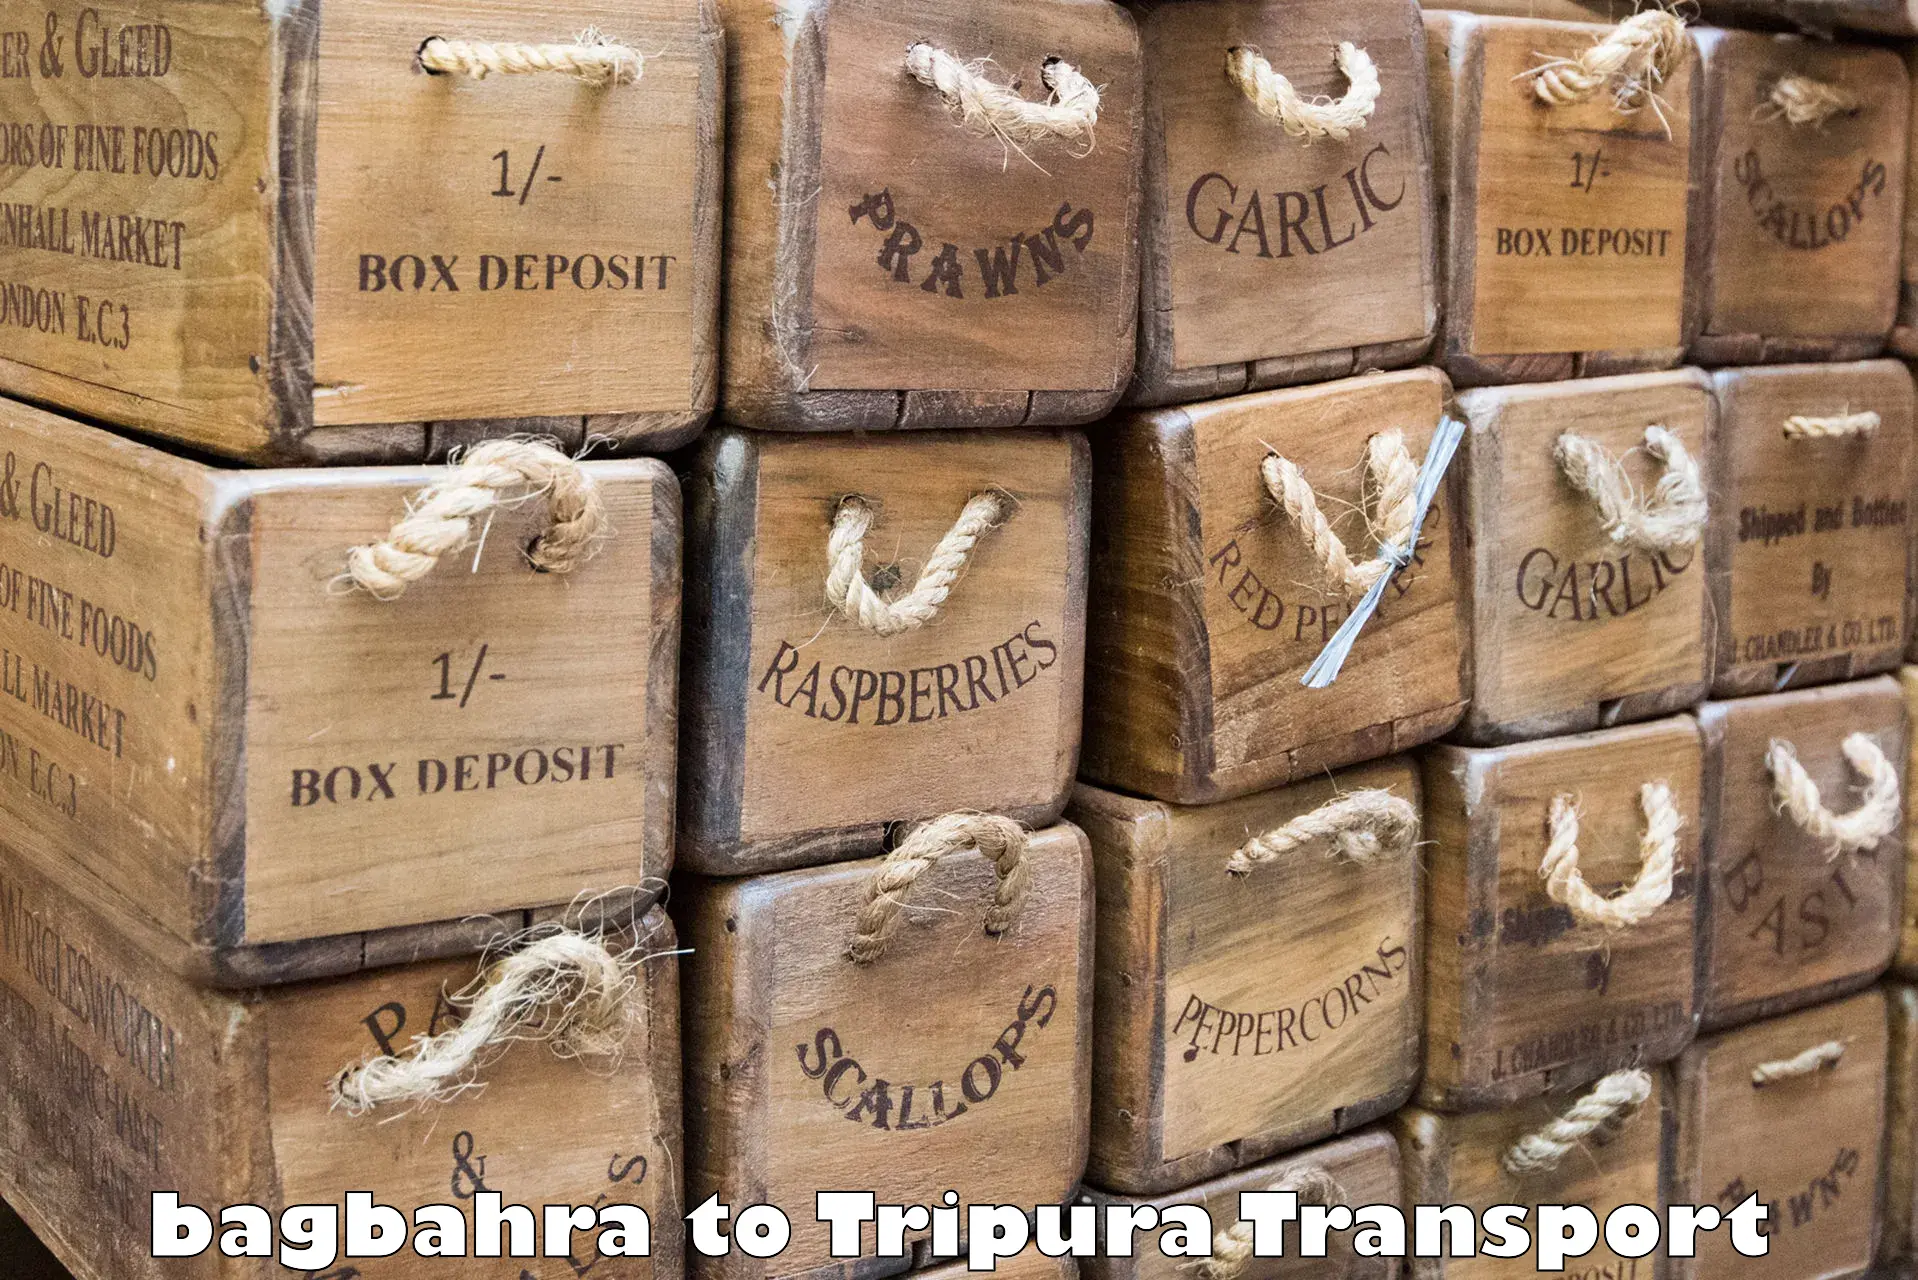 Air freight transport services bagbahra to Udaipur Tripura